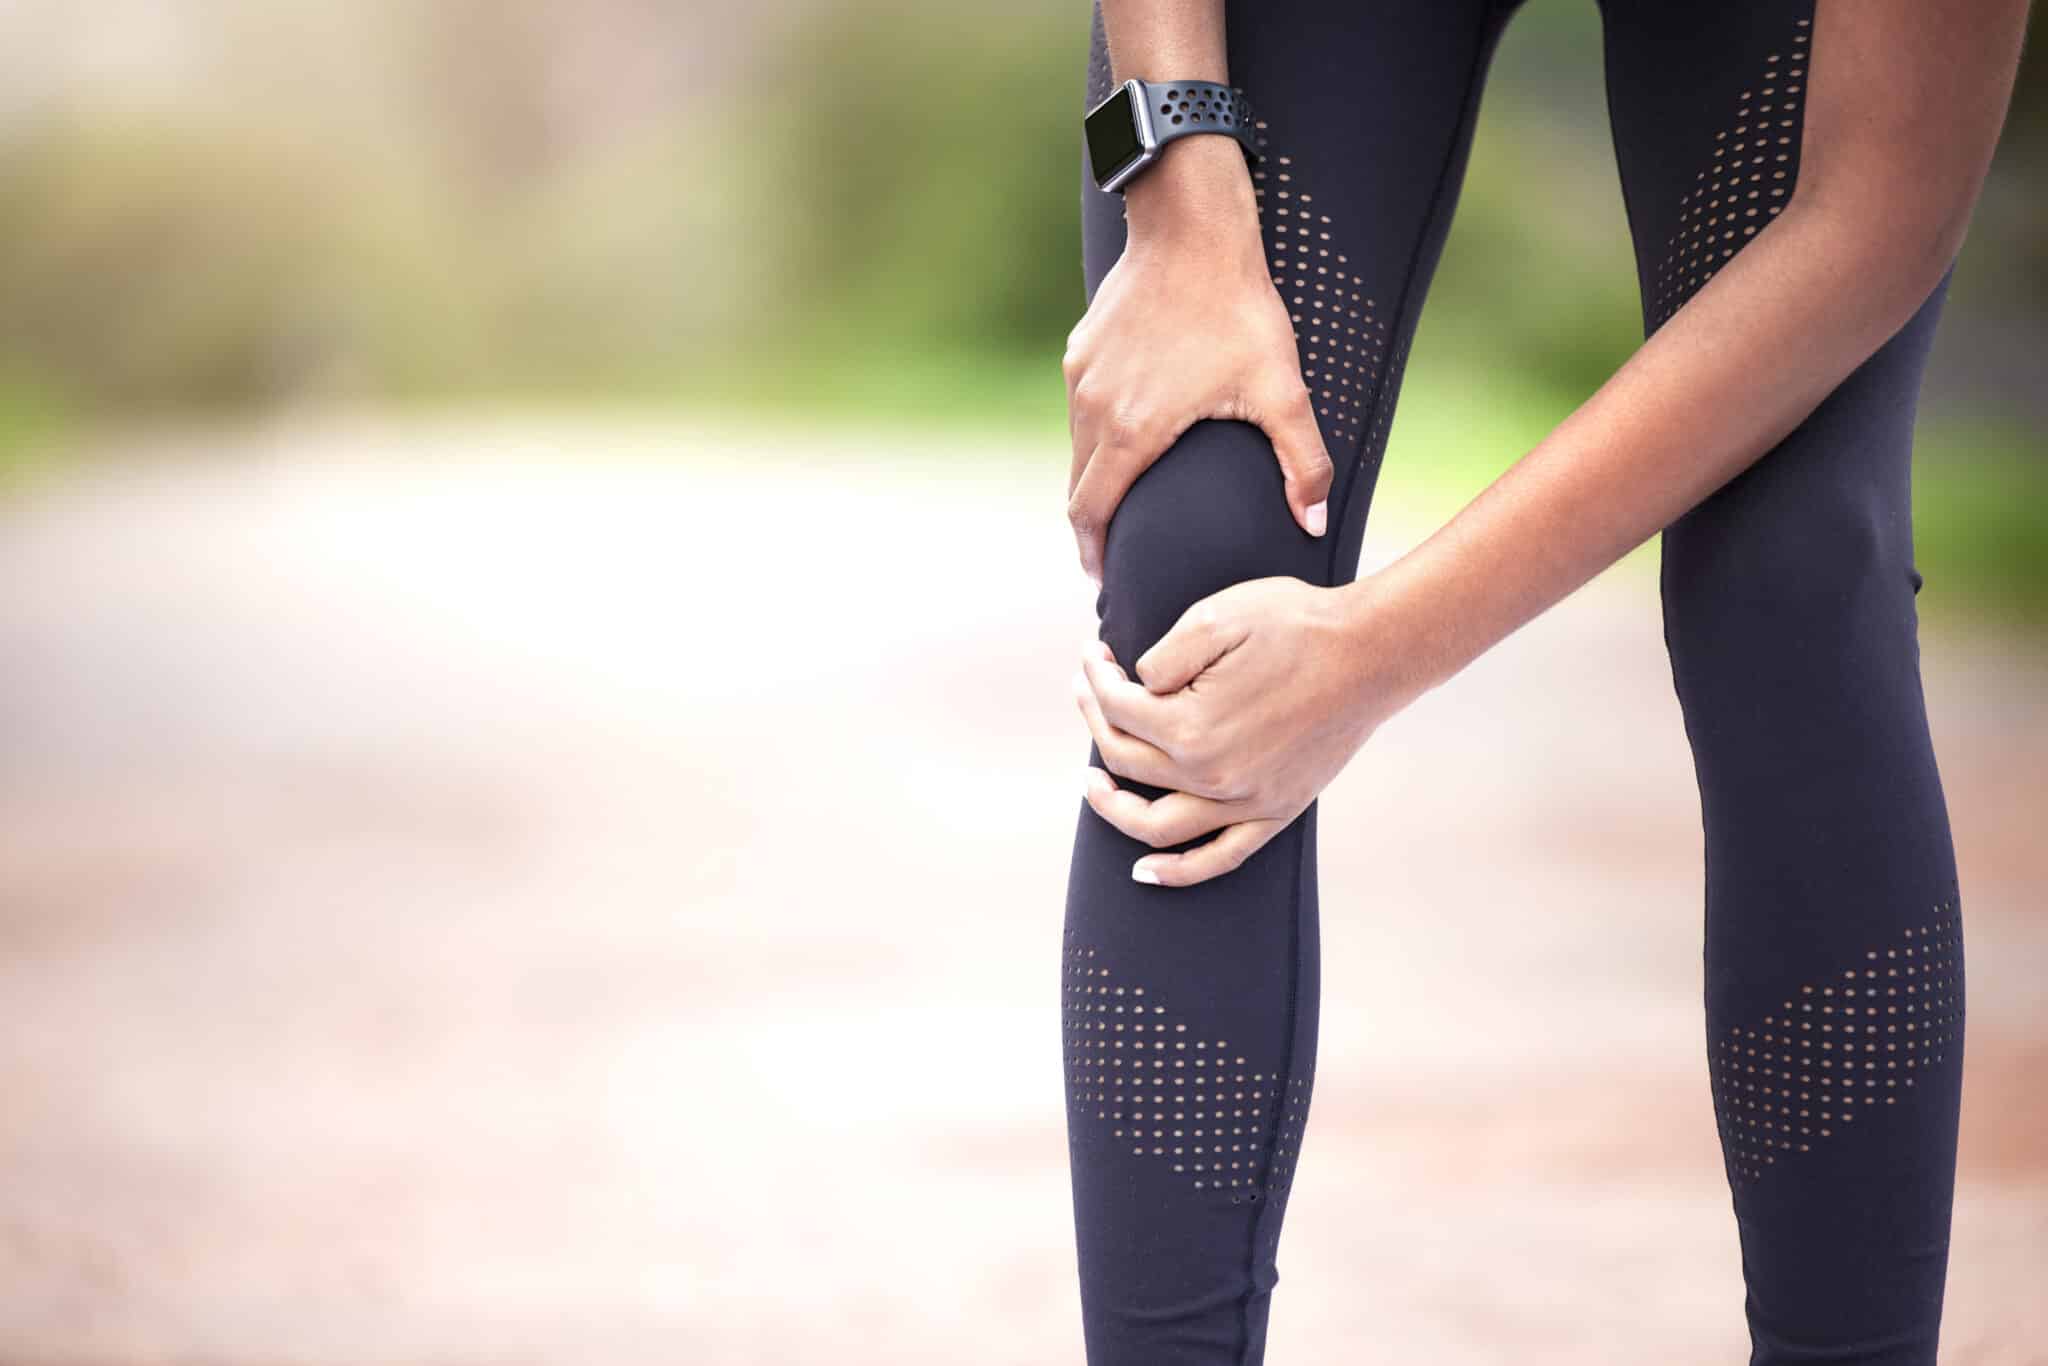 Foods to avoid with patellar femoral pain syndrome